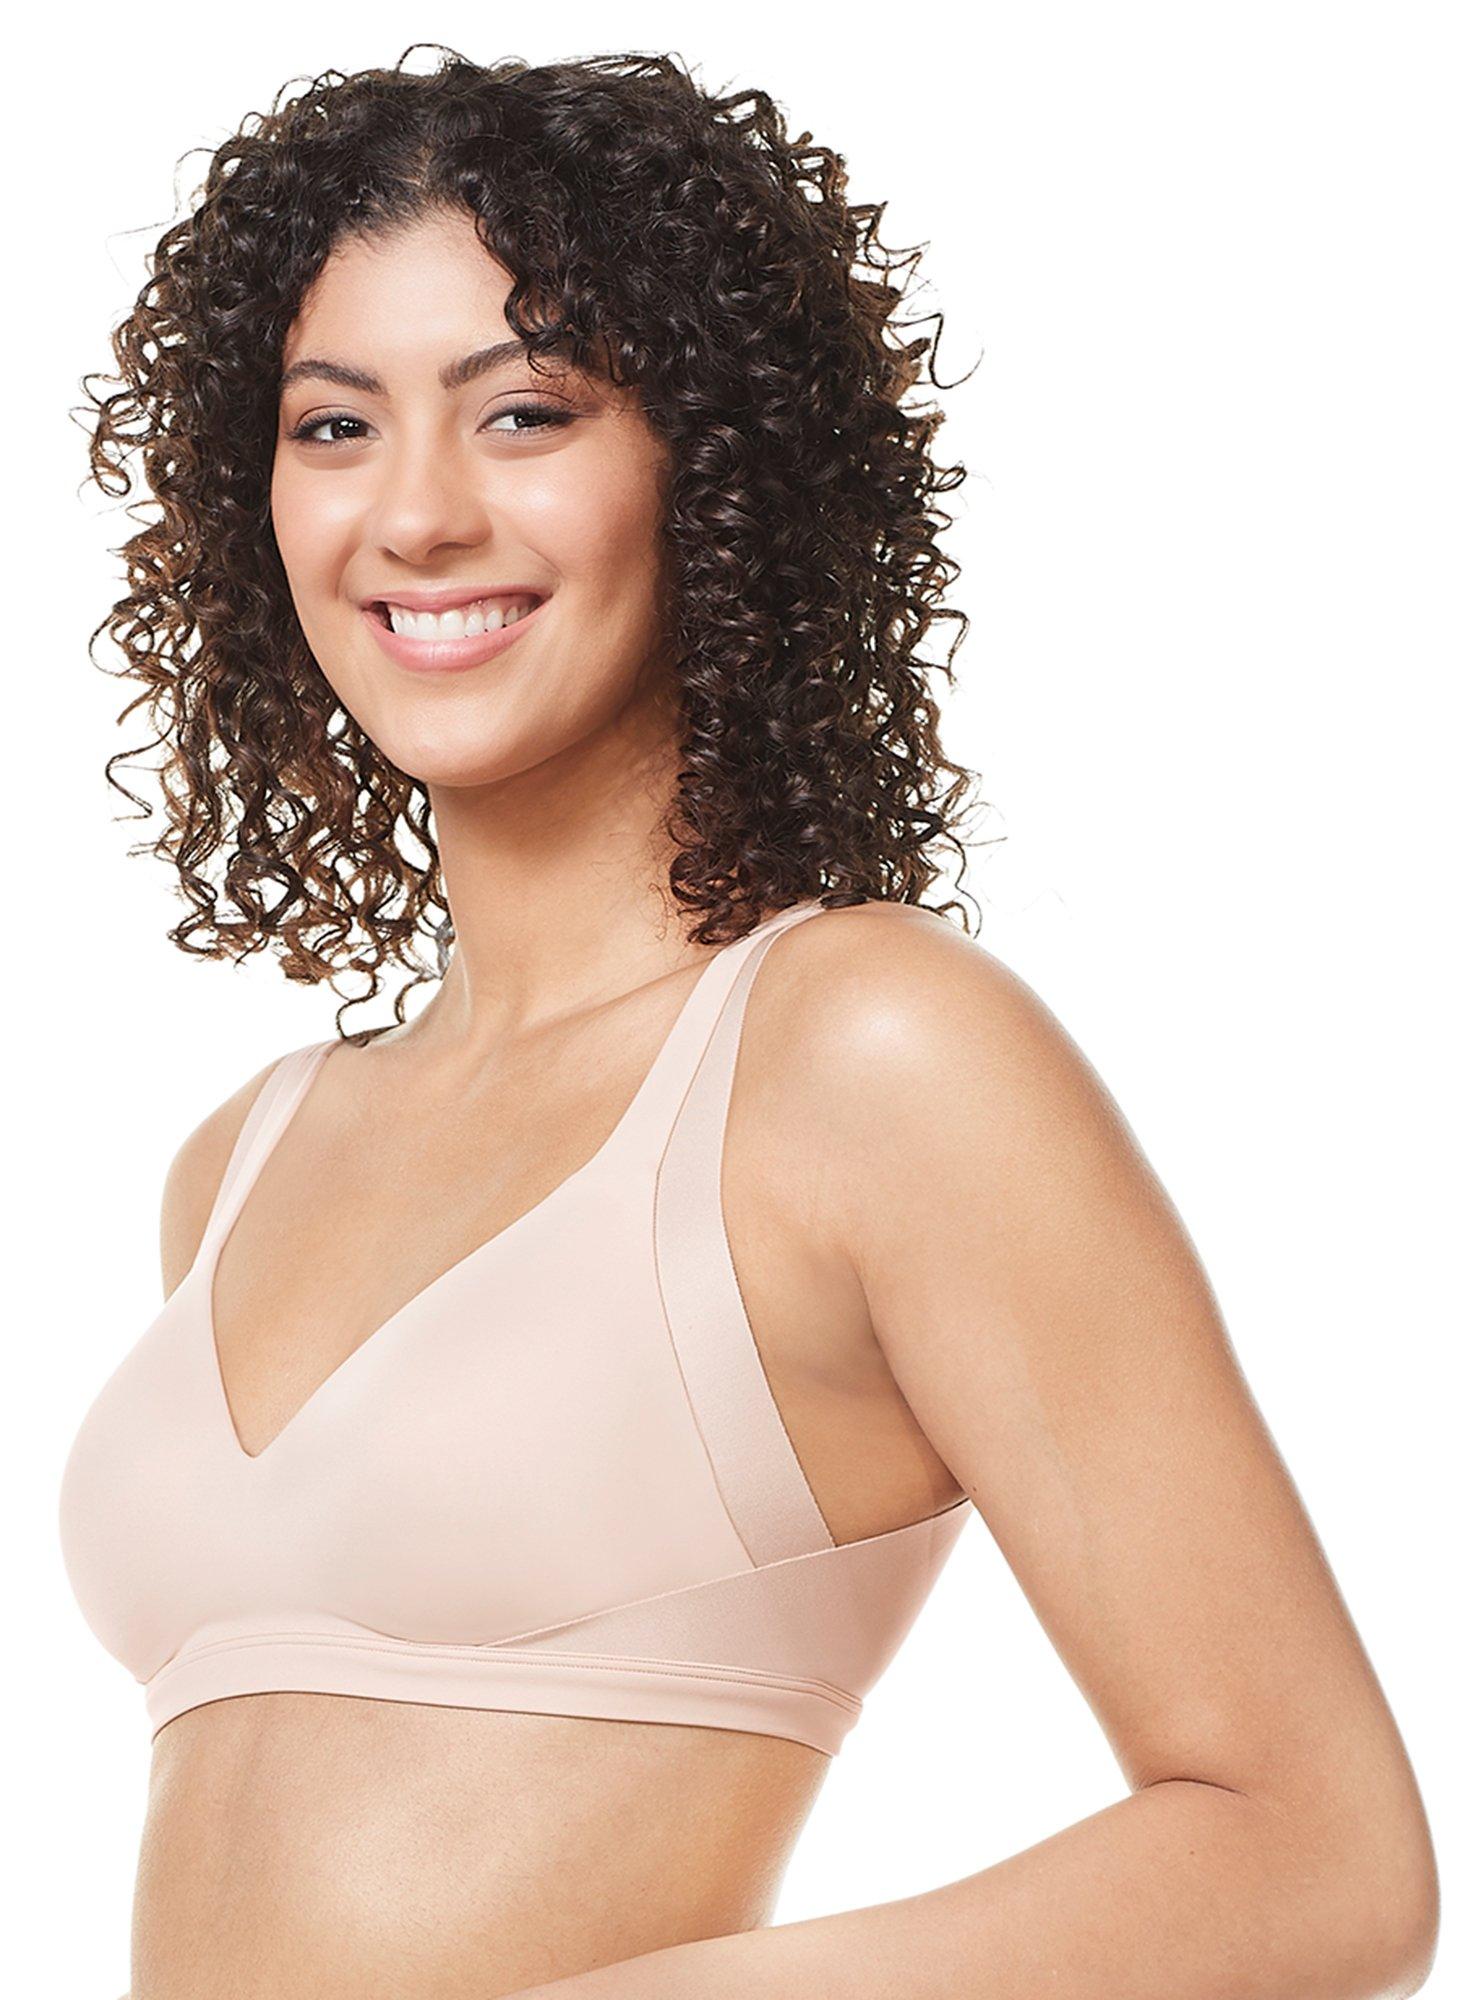 Bali Womens Double Support Lace Wirefree Bra with Spa Closure -  Best-Seller!